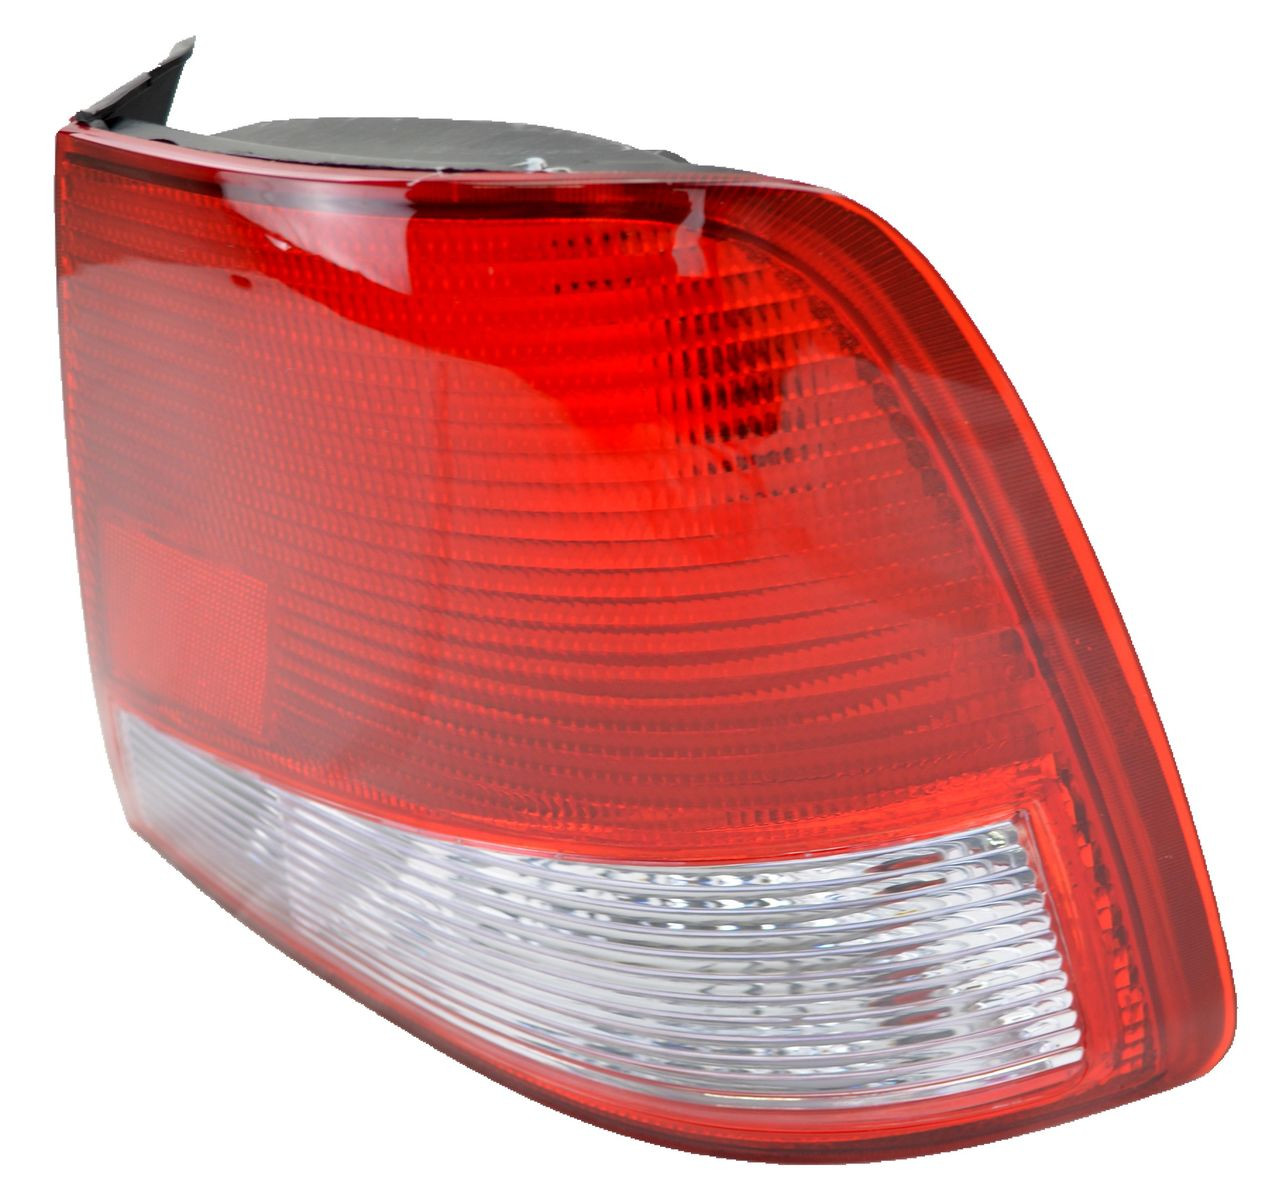 Tail light for Hyundai Accent LC/LS 07/00-07/02 New Right RHS Rear Lamp Hatchback 01